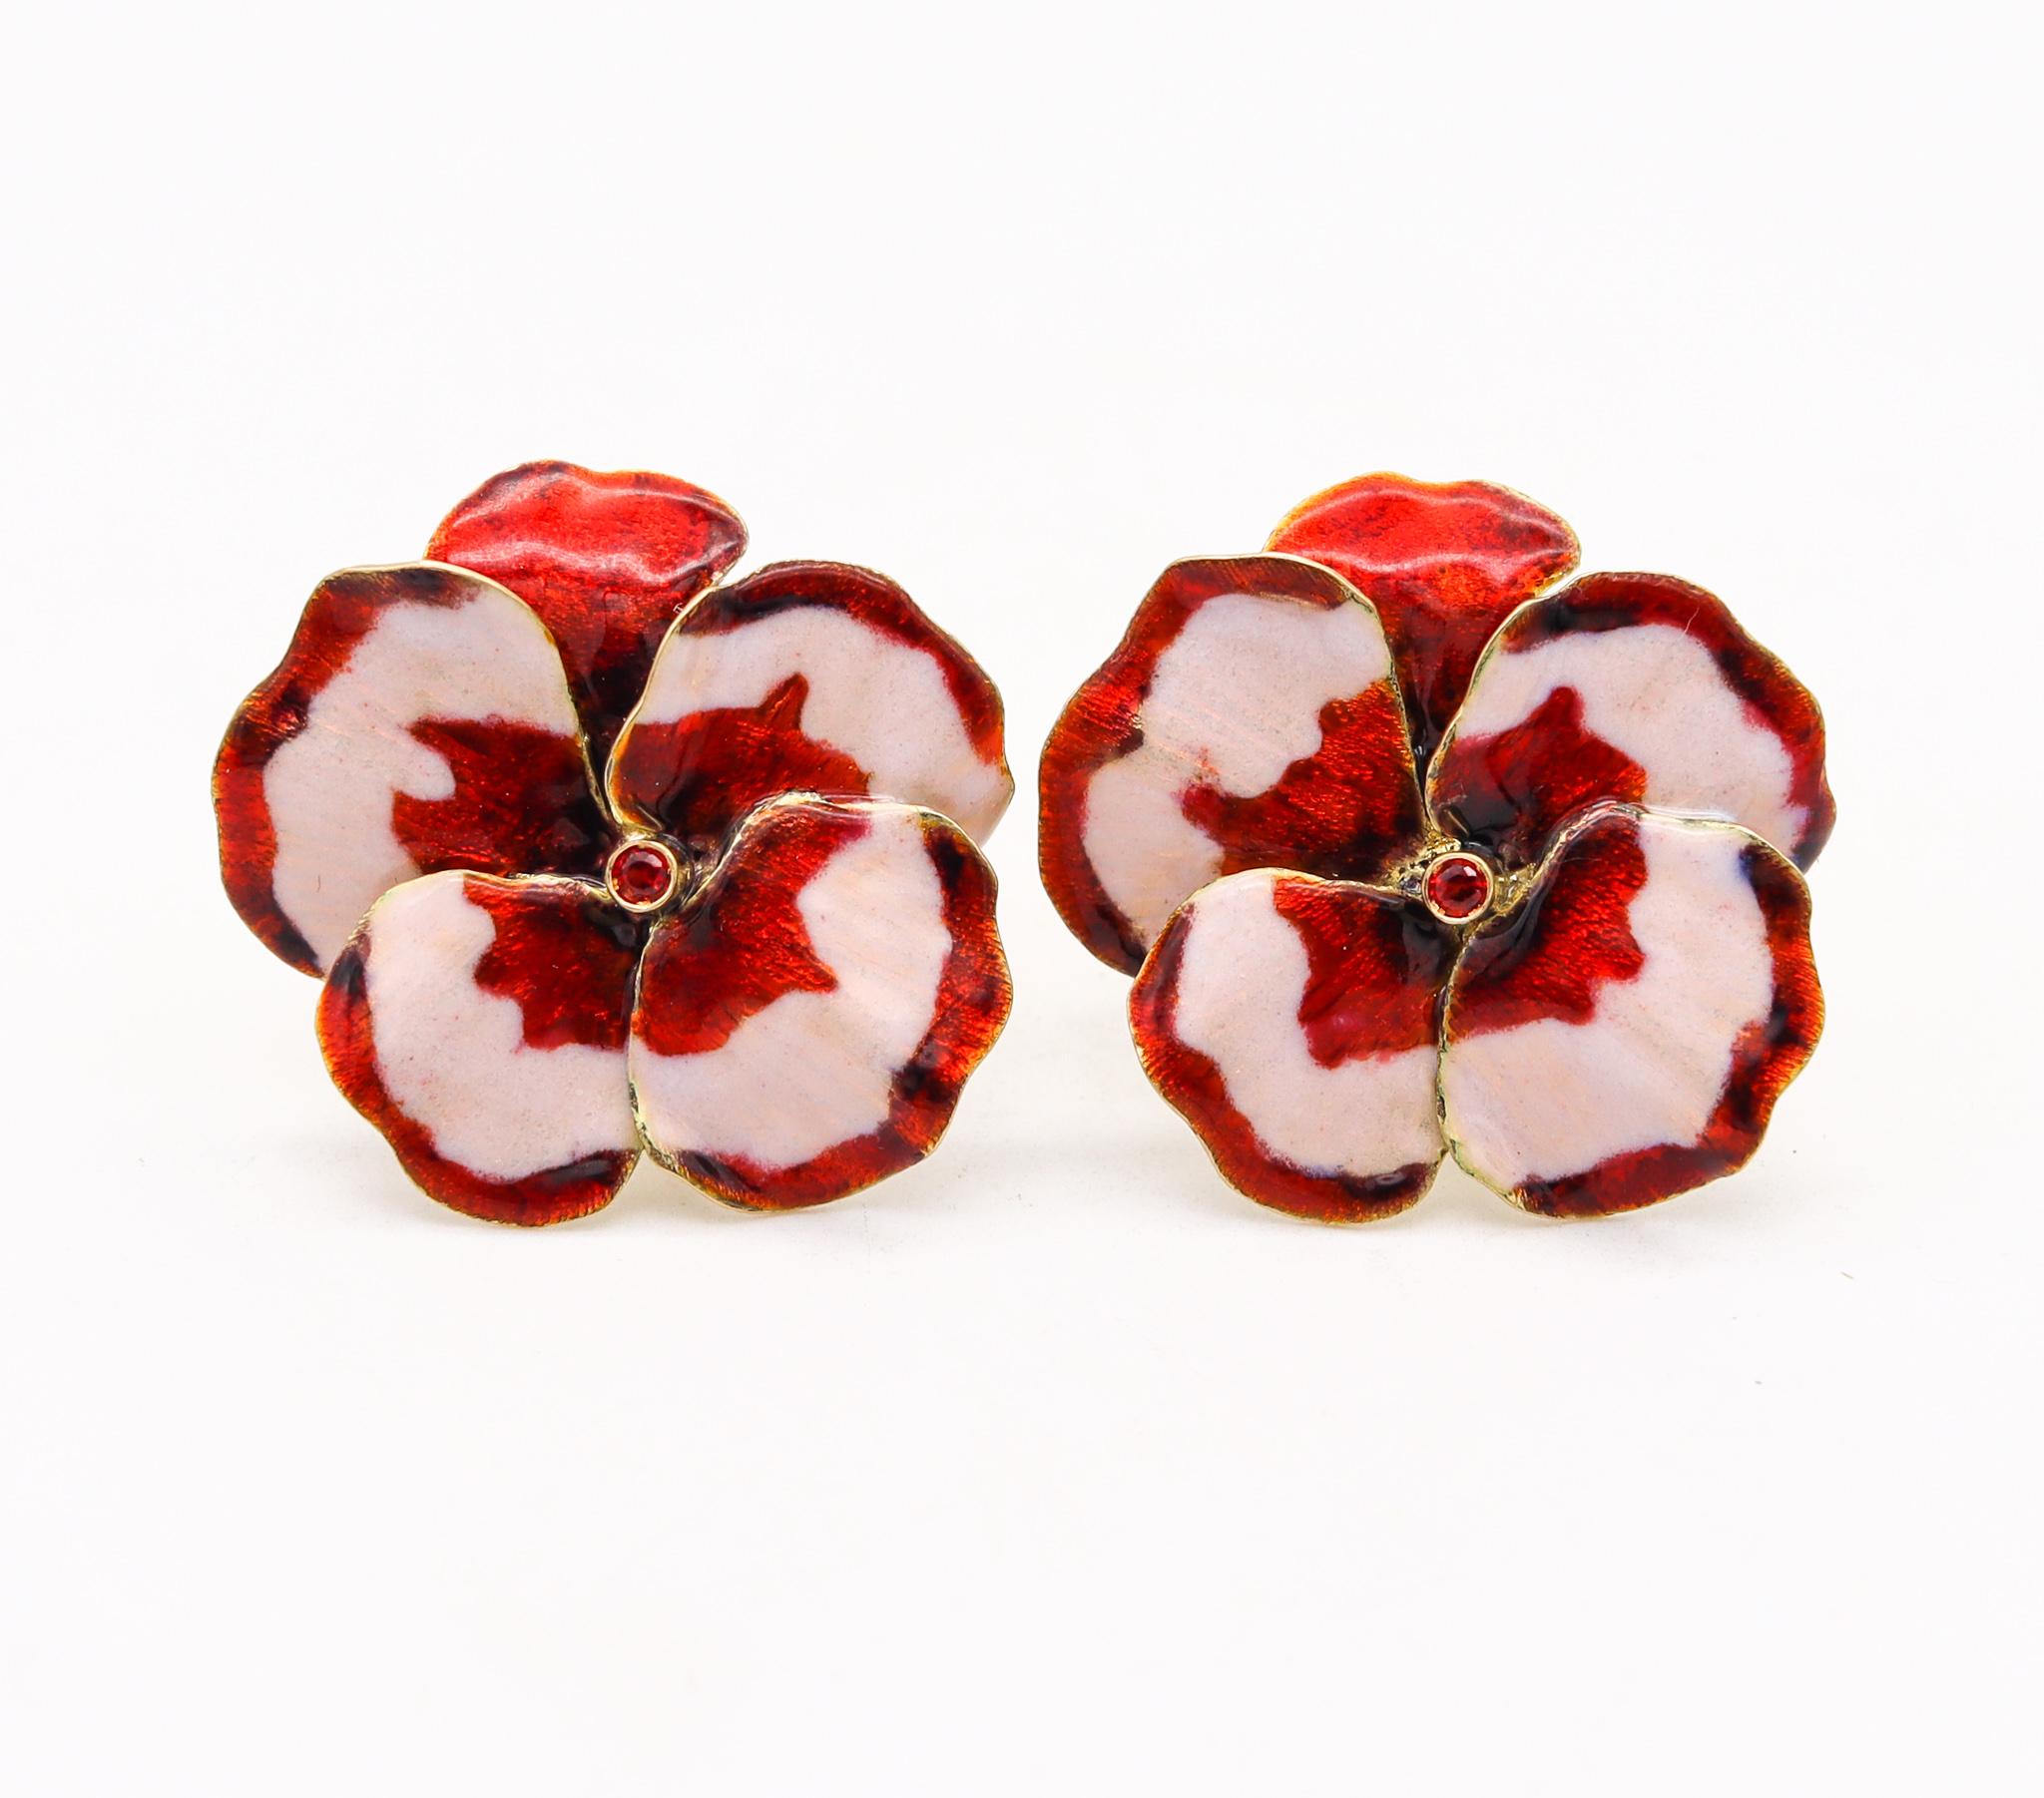 Enameled orchids clip earrings designed by Luz Camino.

A beautiful colorful pieces created in Madrid by the Spanish jewelry designer Luz Camino, back in the 1990's. These vintage pair of clip-on earrings has been designed in the shape of